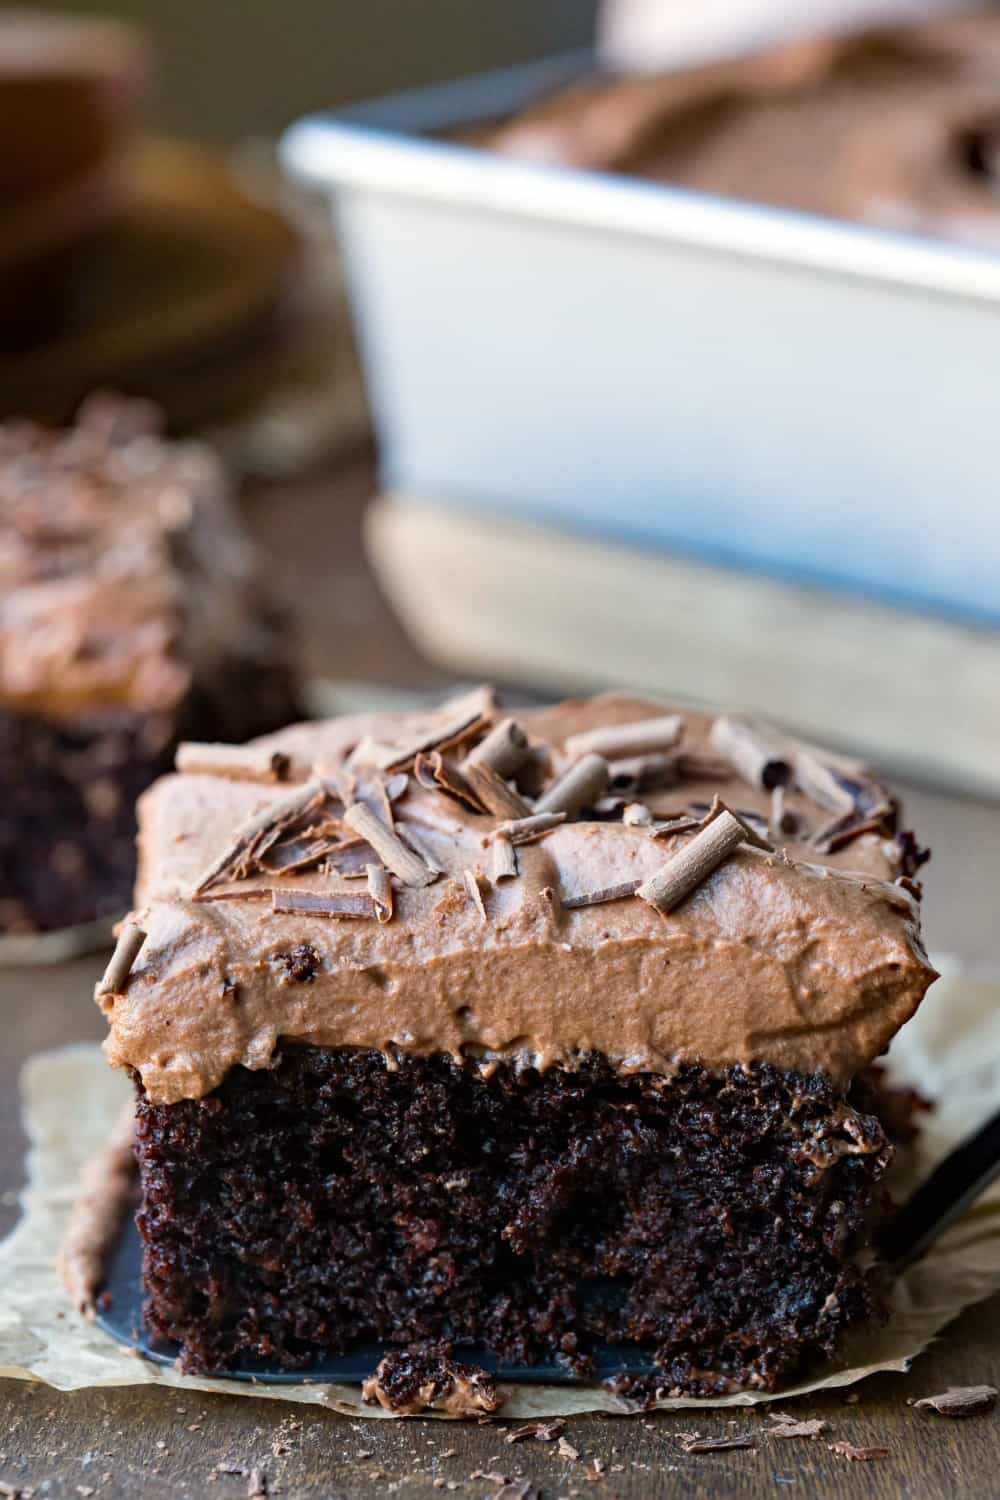 a slice of chocolate cake with mousse frosting.